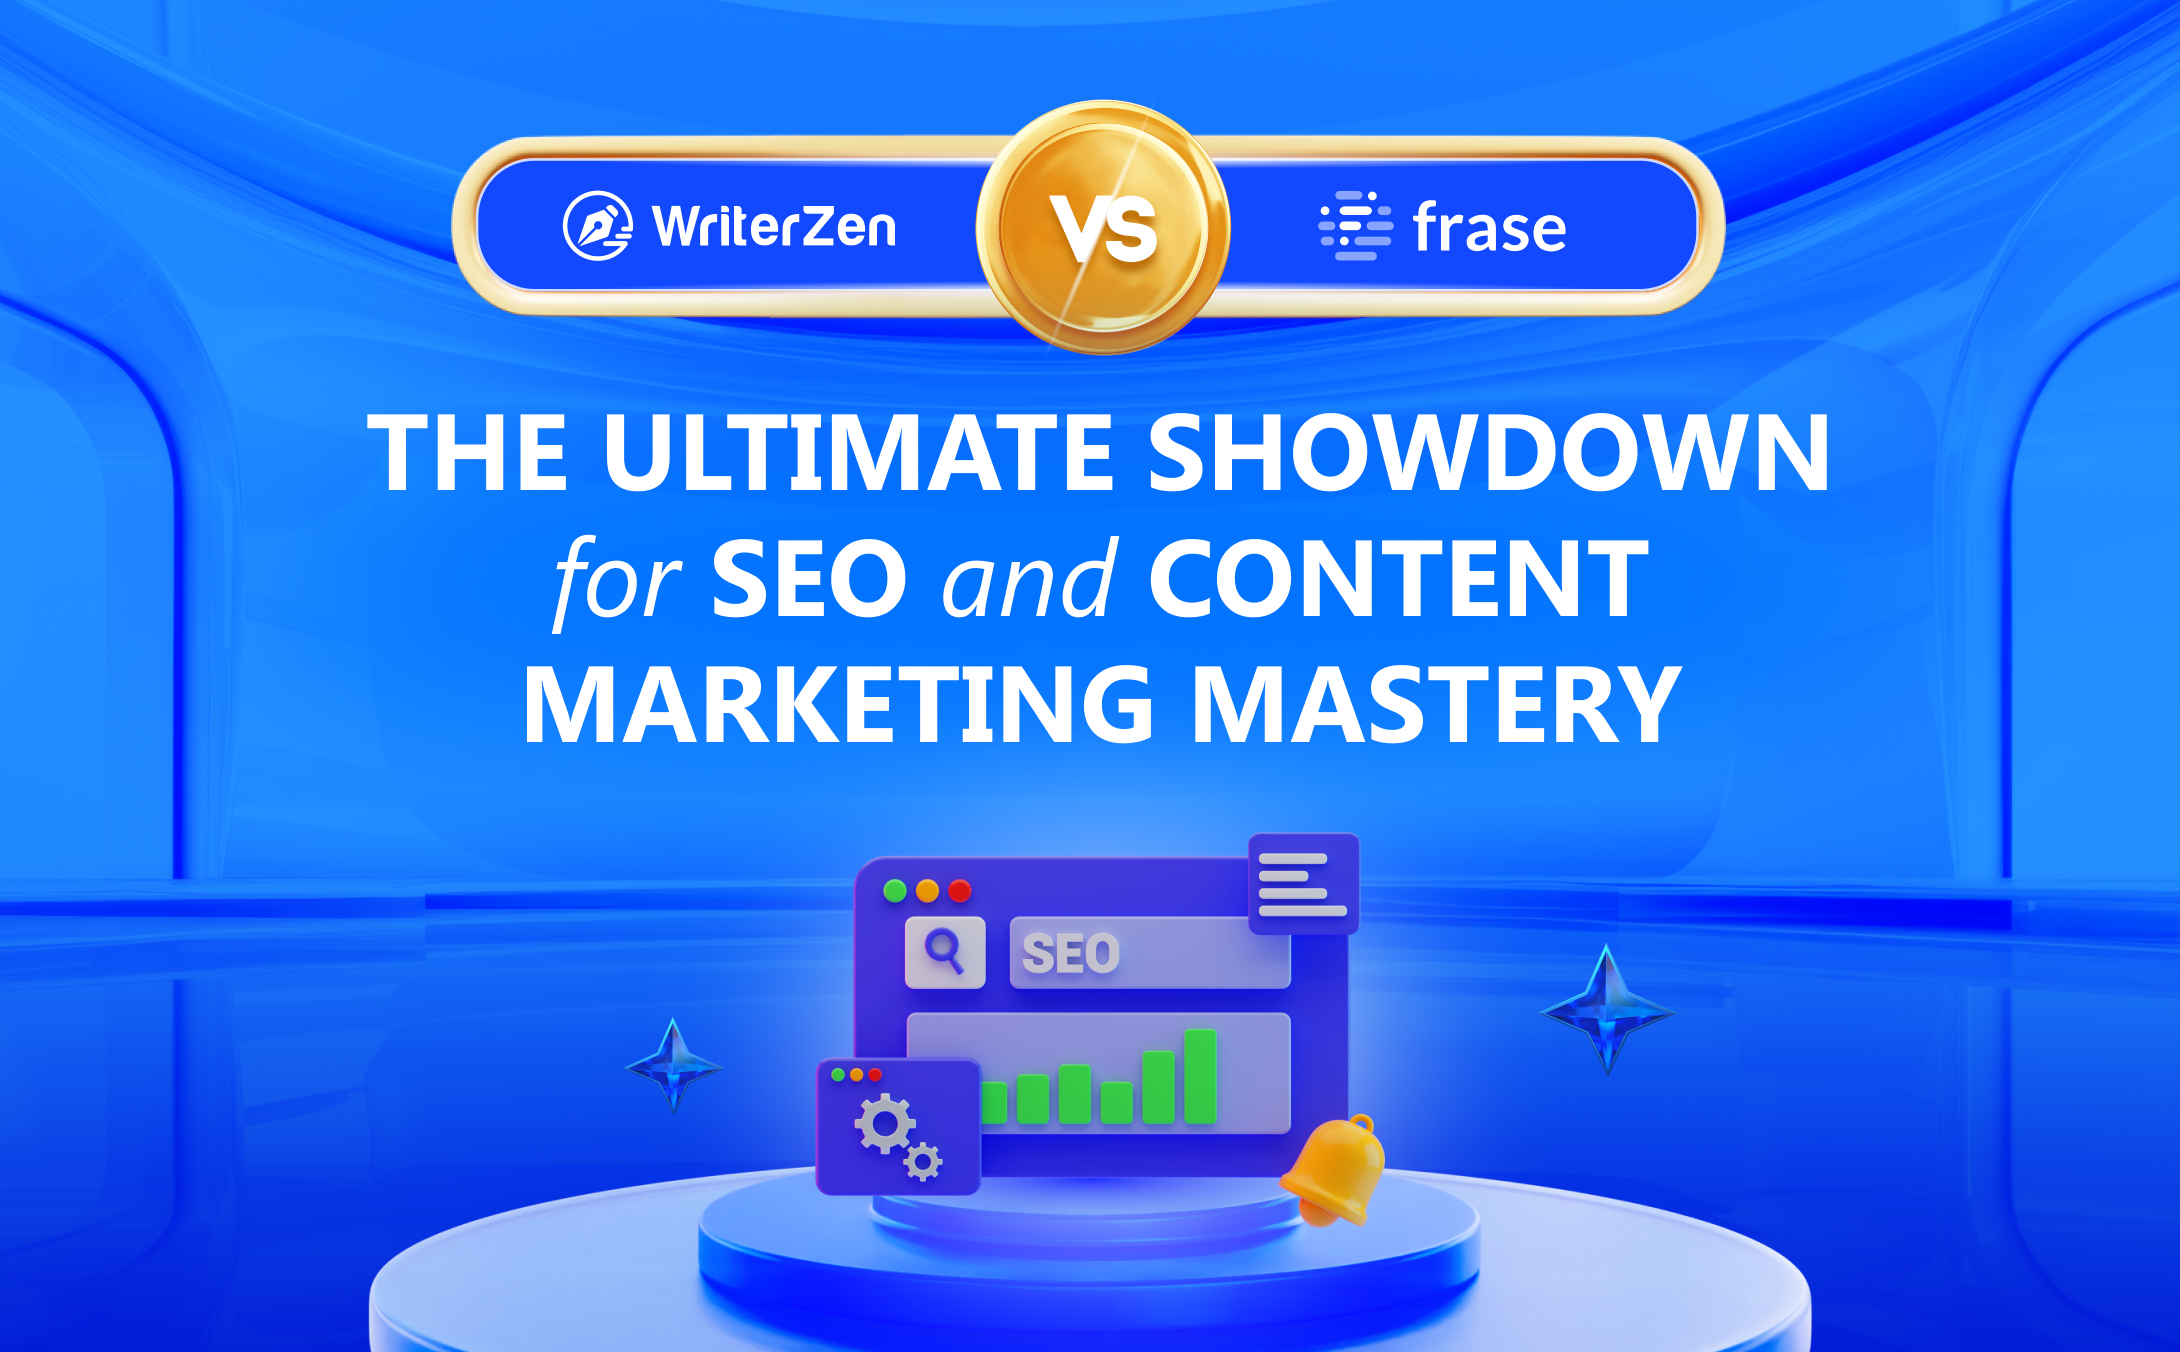 WriterZen vs. Frase: The Ultimate Showdown for SEO and Content Marketing Mastery